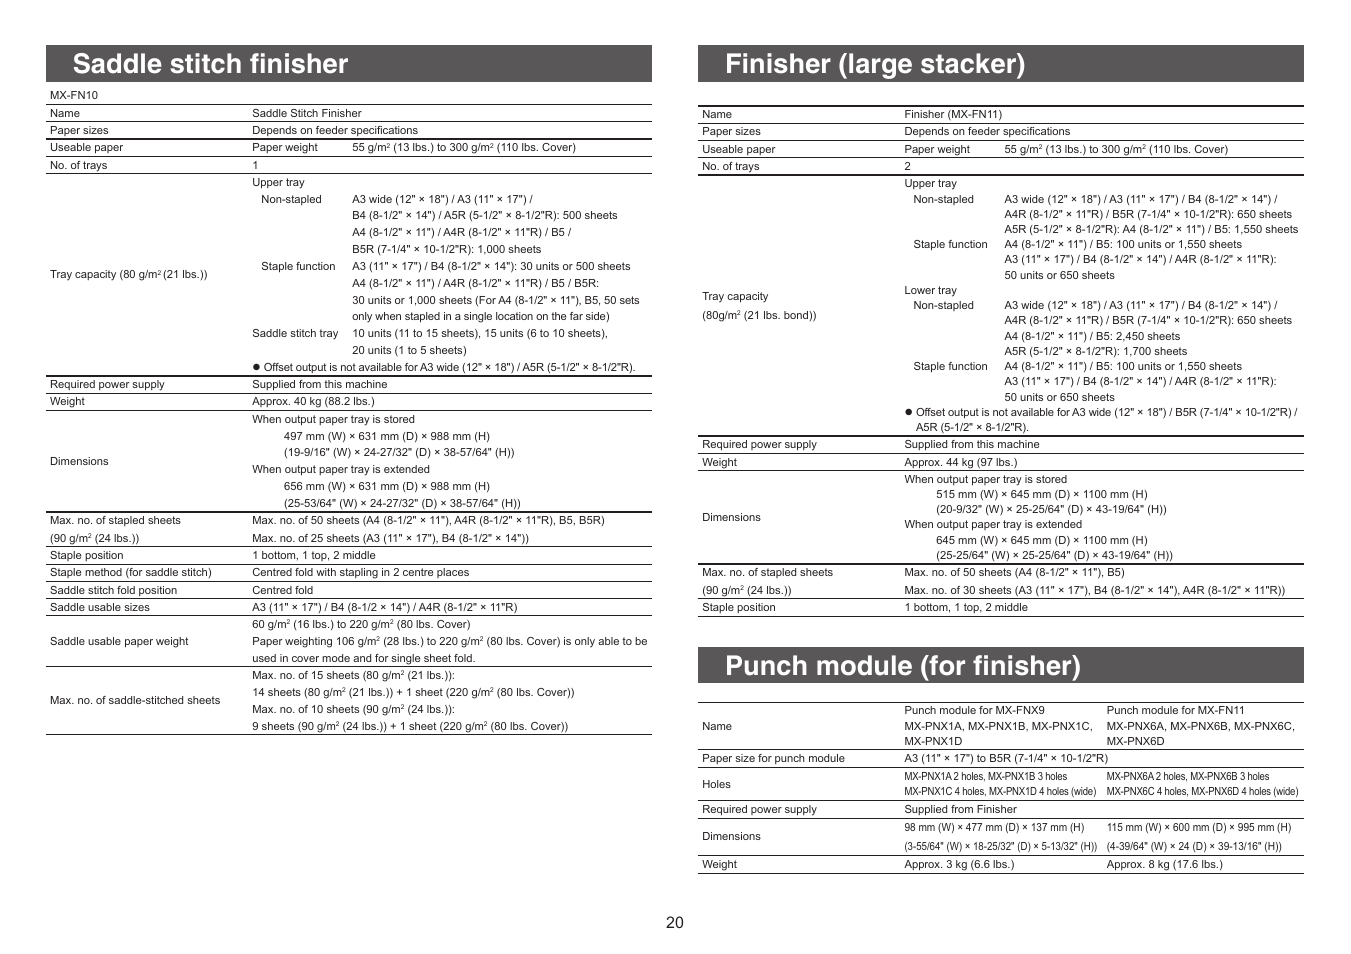 Saddle stitch finisher finisher (large stacker), Punch module (for finisher) | Sharp MX-5140N User Manual | Page 20 / 28